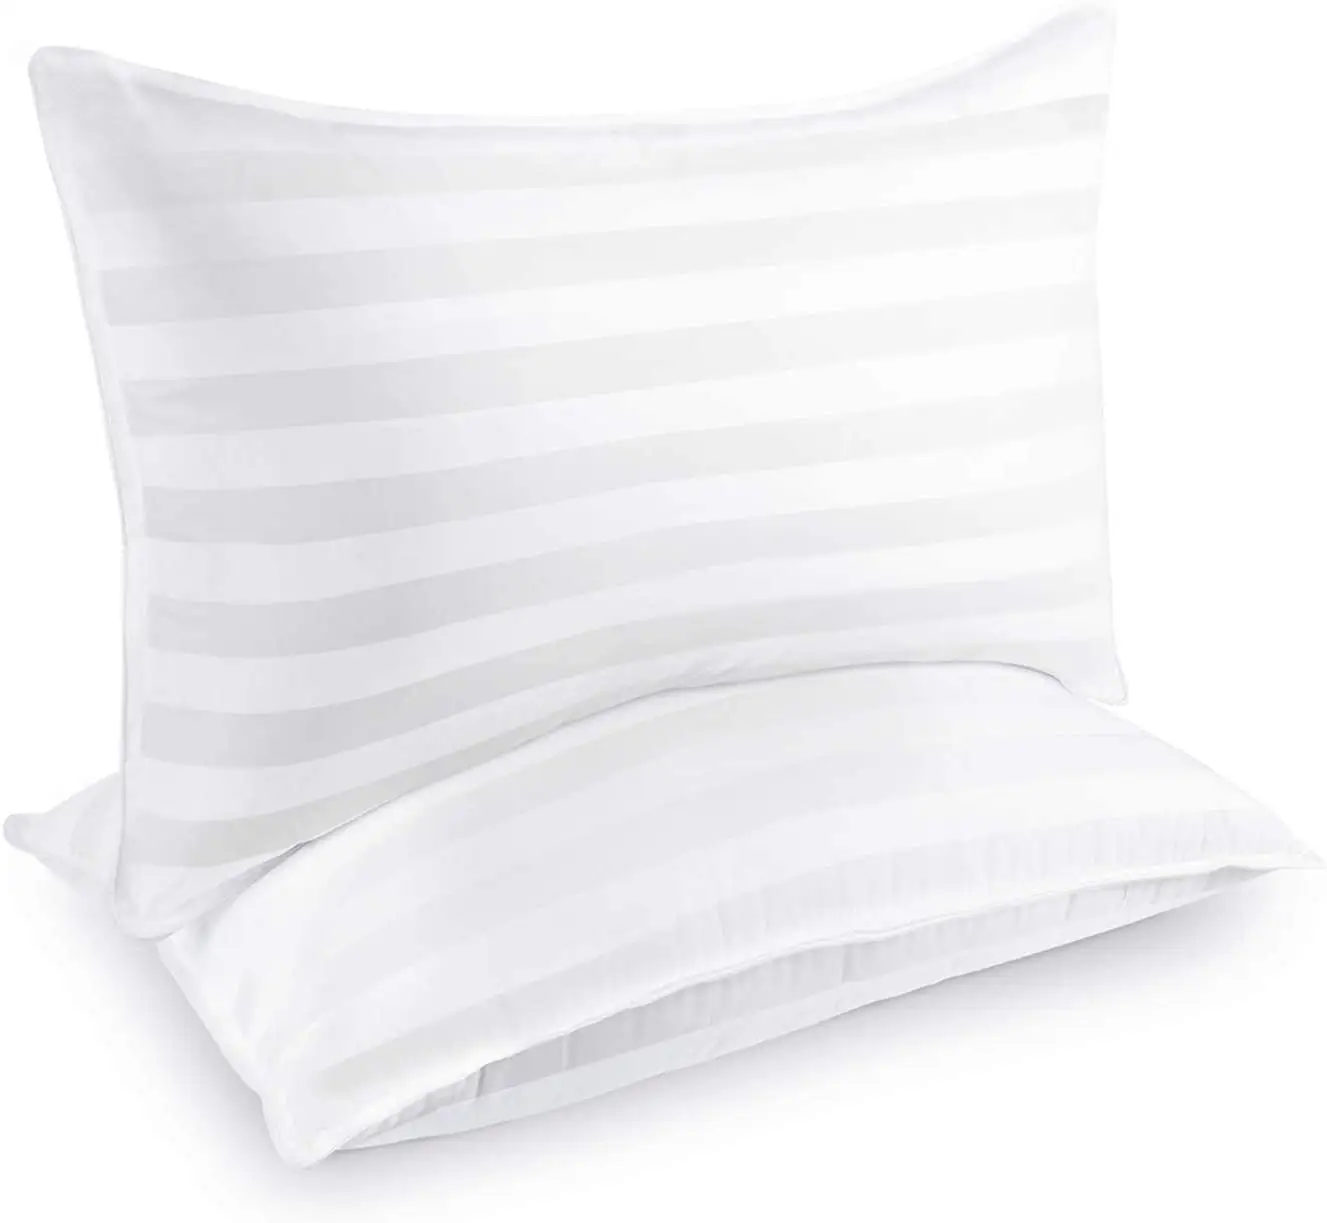 Hotel Quality Pillows for Sleeping - Luxury Plush Gel Pillow - 100% Breathable Cotton Cover